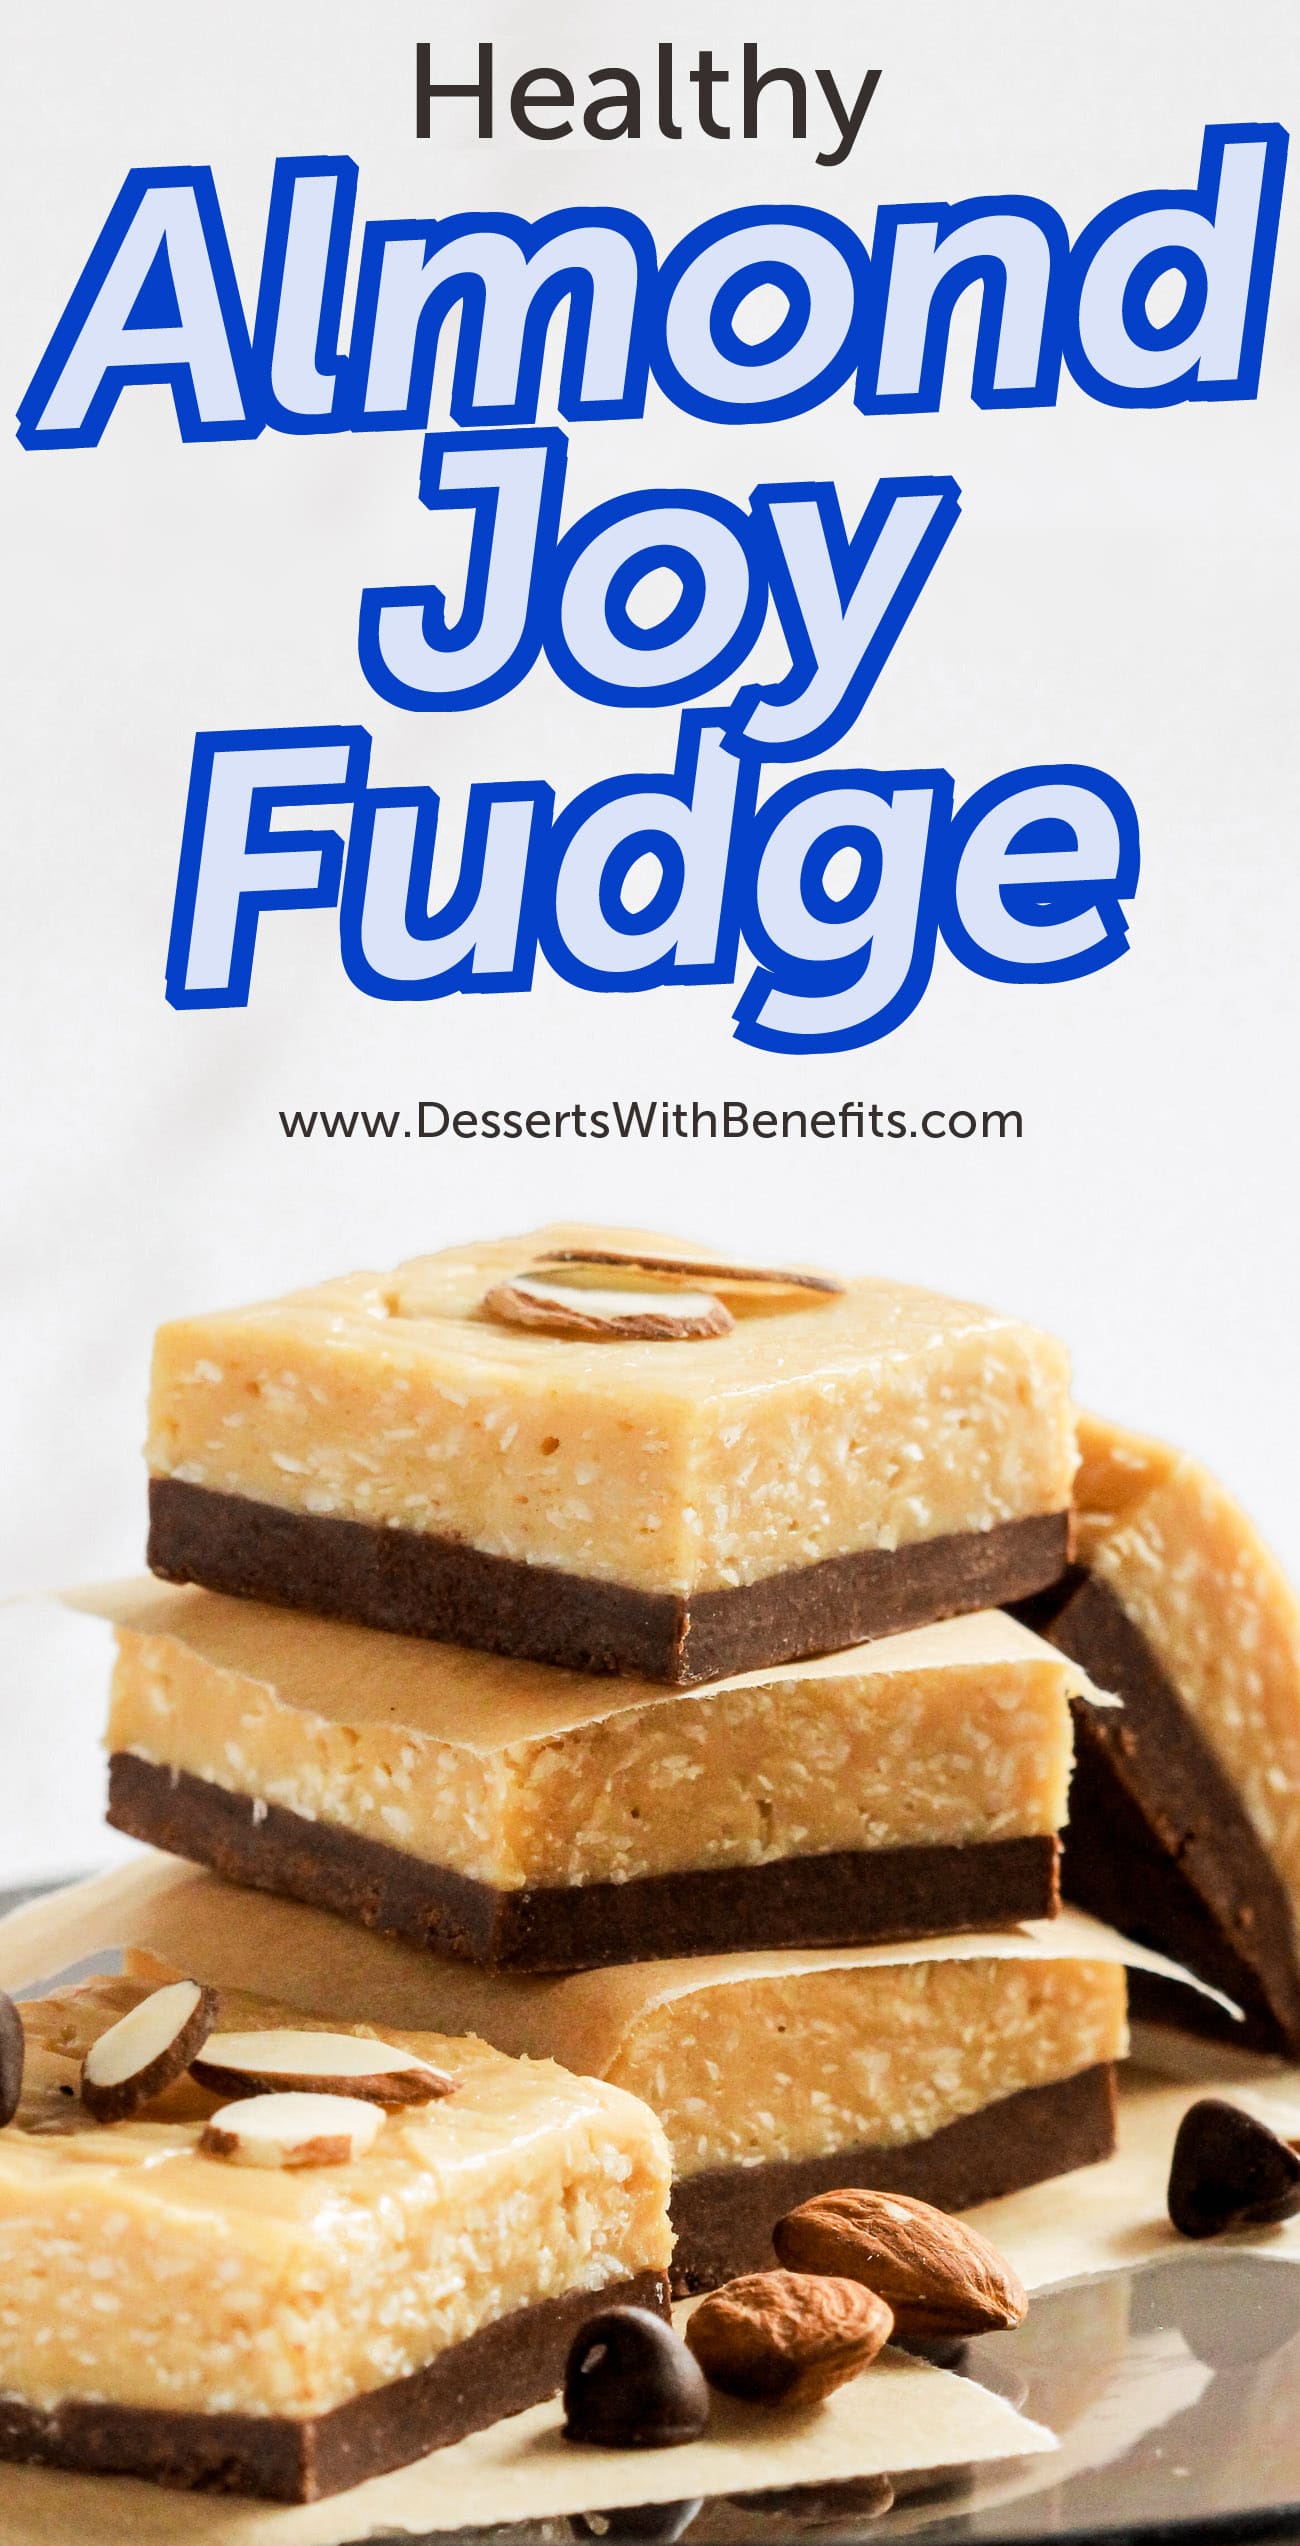 This Almond Joy Candy Fudge is healthy but doesn't taste healthy at all. It's just as soft, sweet and chewy as the original, but without the white sugar, hydrogenated oil, preservatives, and artificial ingredients. This fudge is refined sugar free, high fiber, high protein, and gluten free too!